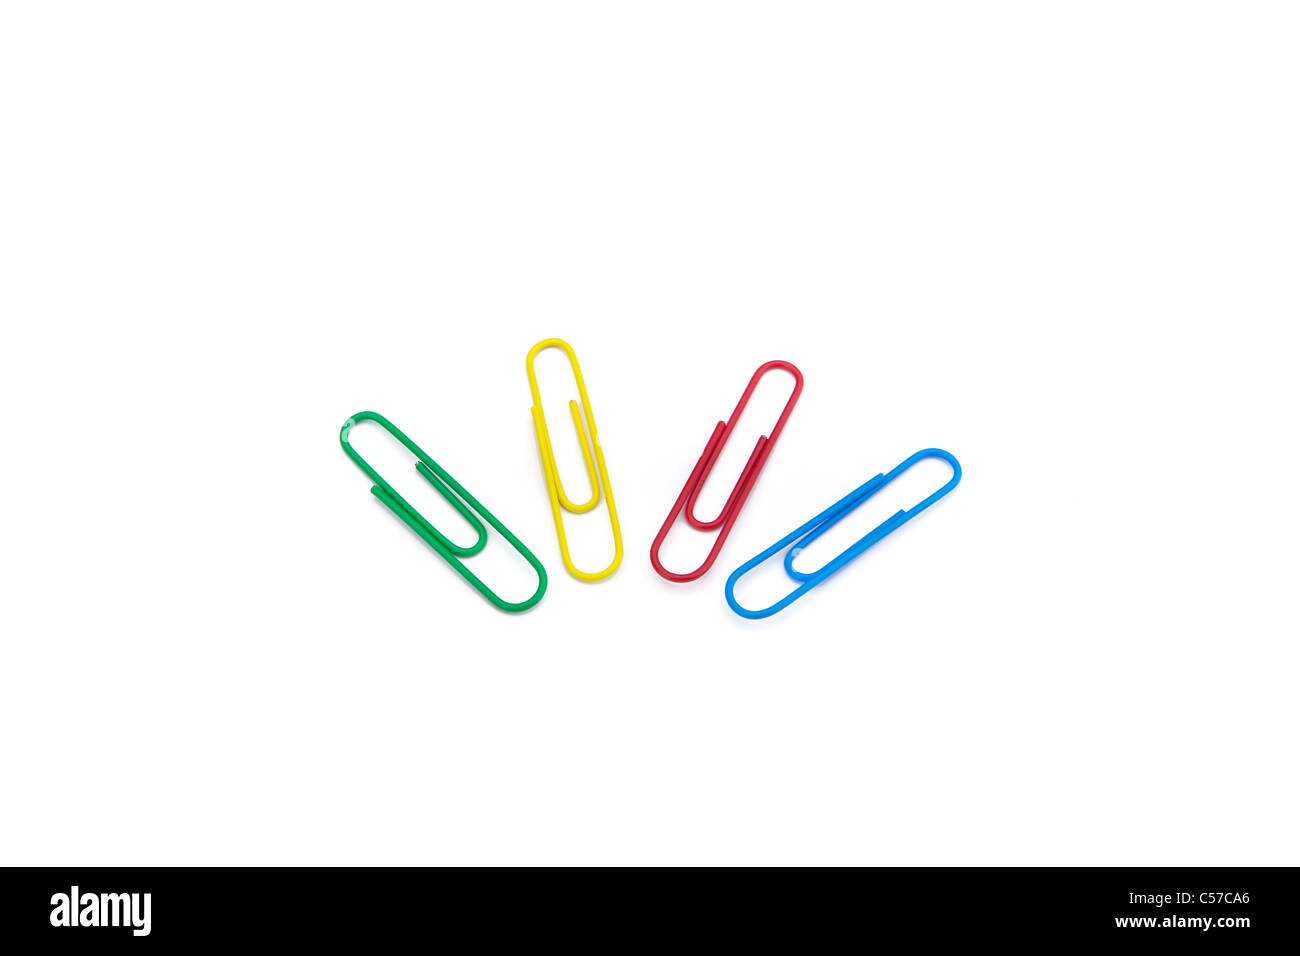 four colored paper clips on white background Stock Photo